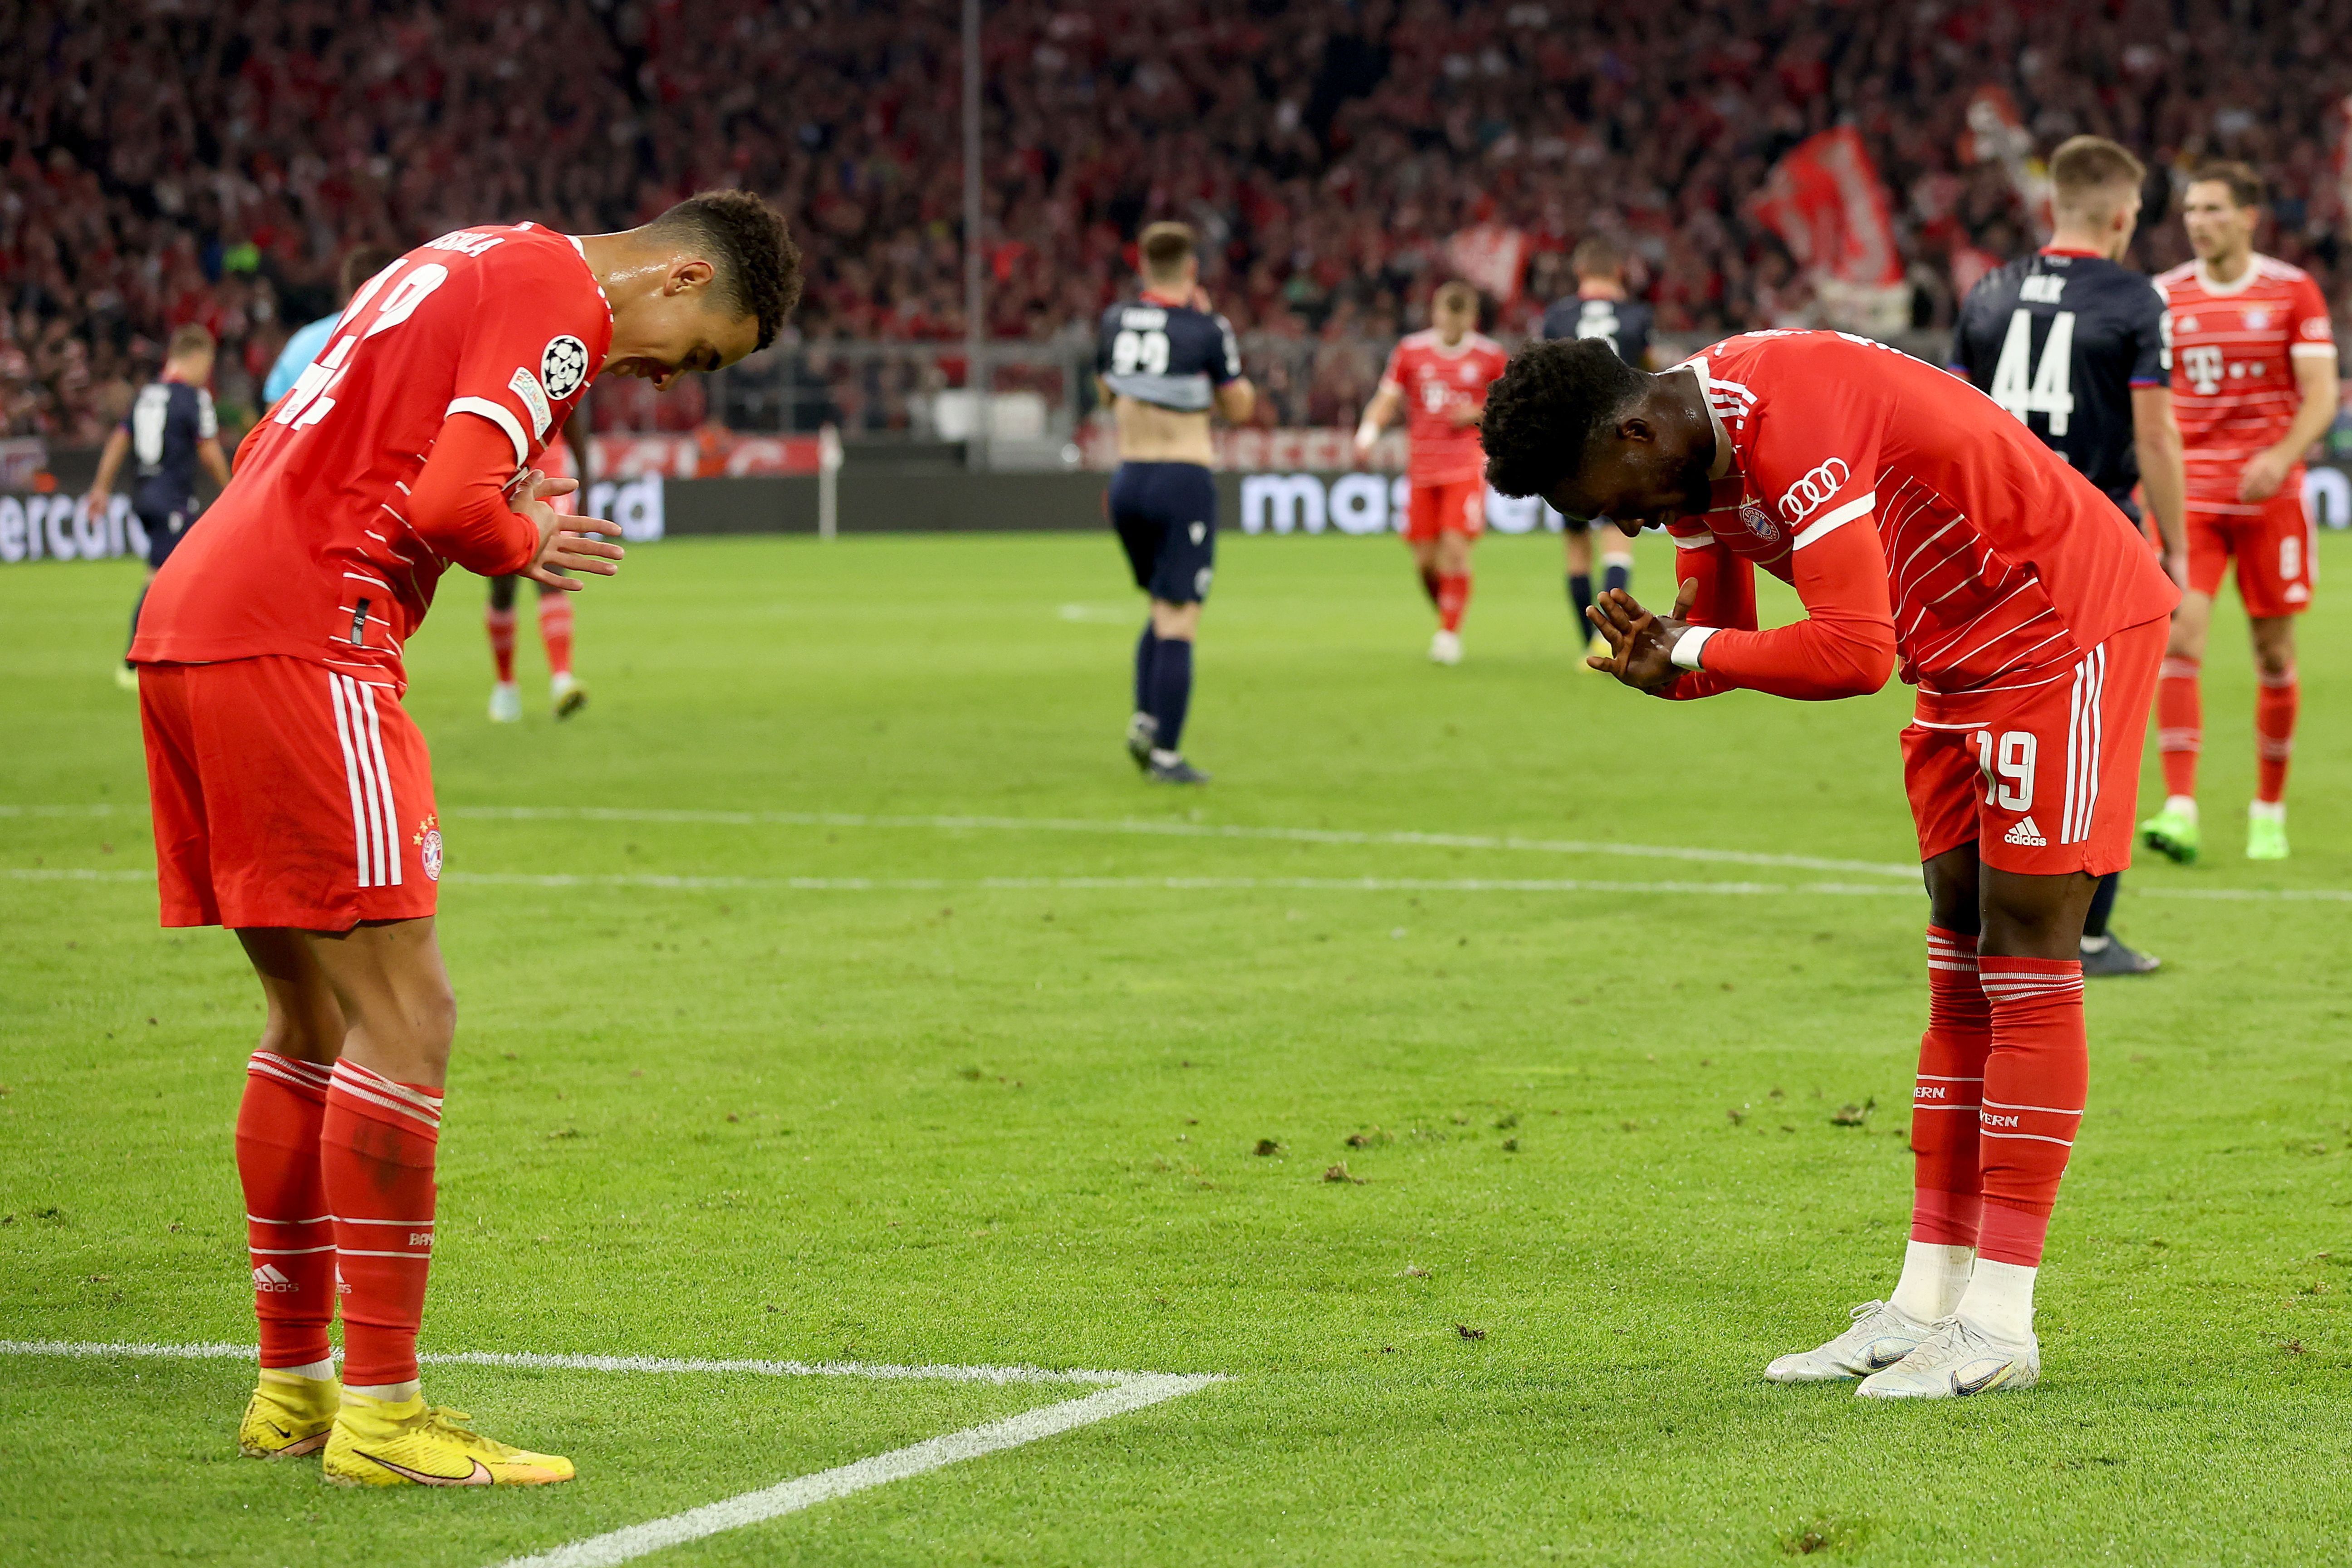 Jamal Musiala celebrates a goal with Alphonso Davies of Bayern Munich which was later disallowed by VAR during the UEFA Champions League group C match between FC Bayern München and Viktoria Plzen at Allianz Arena on October 04, 2022 in Munich, Germany